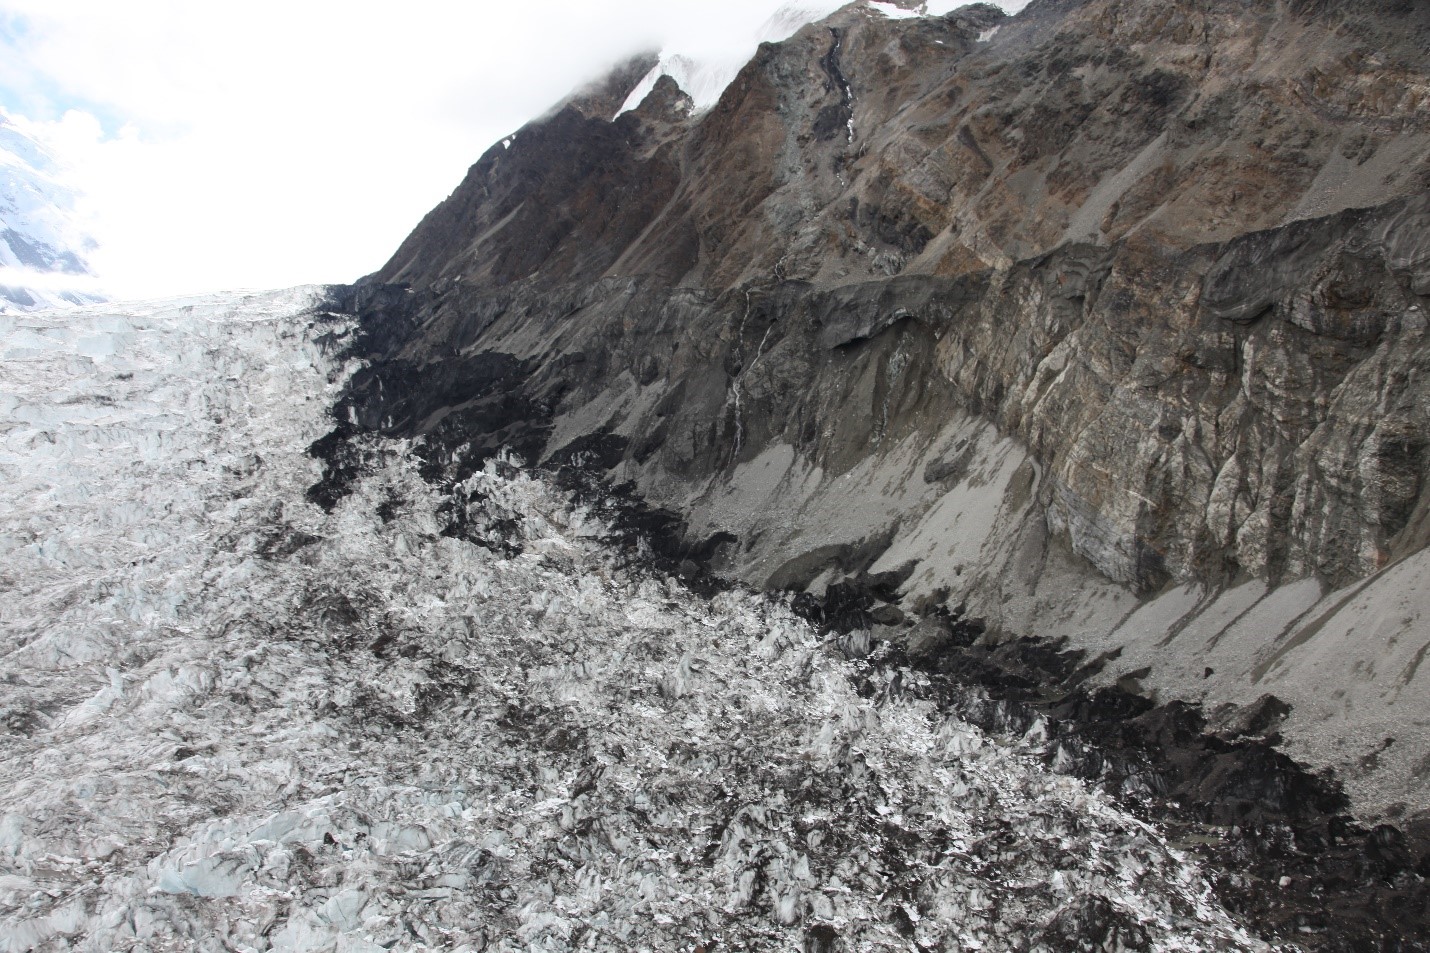 View of multi-textured interface between jumbled glacier ice and a steep rock face